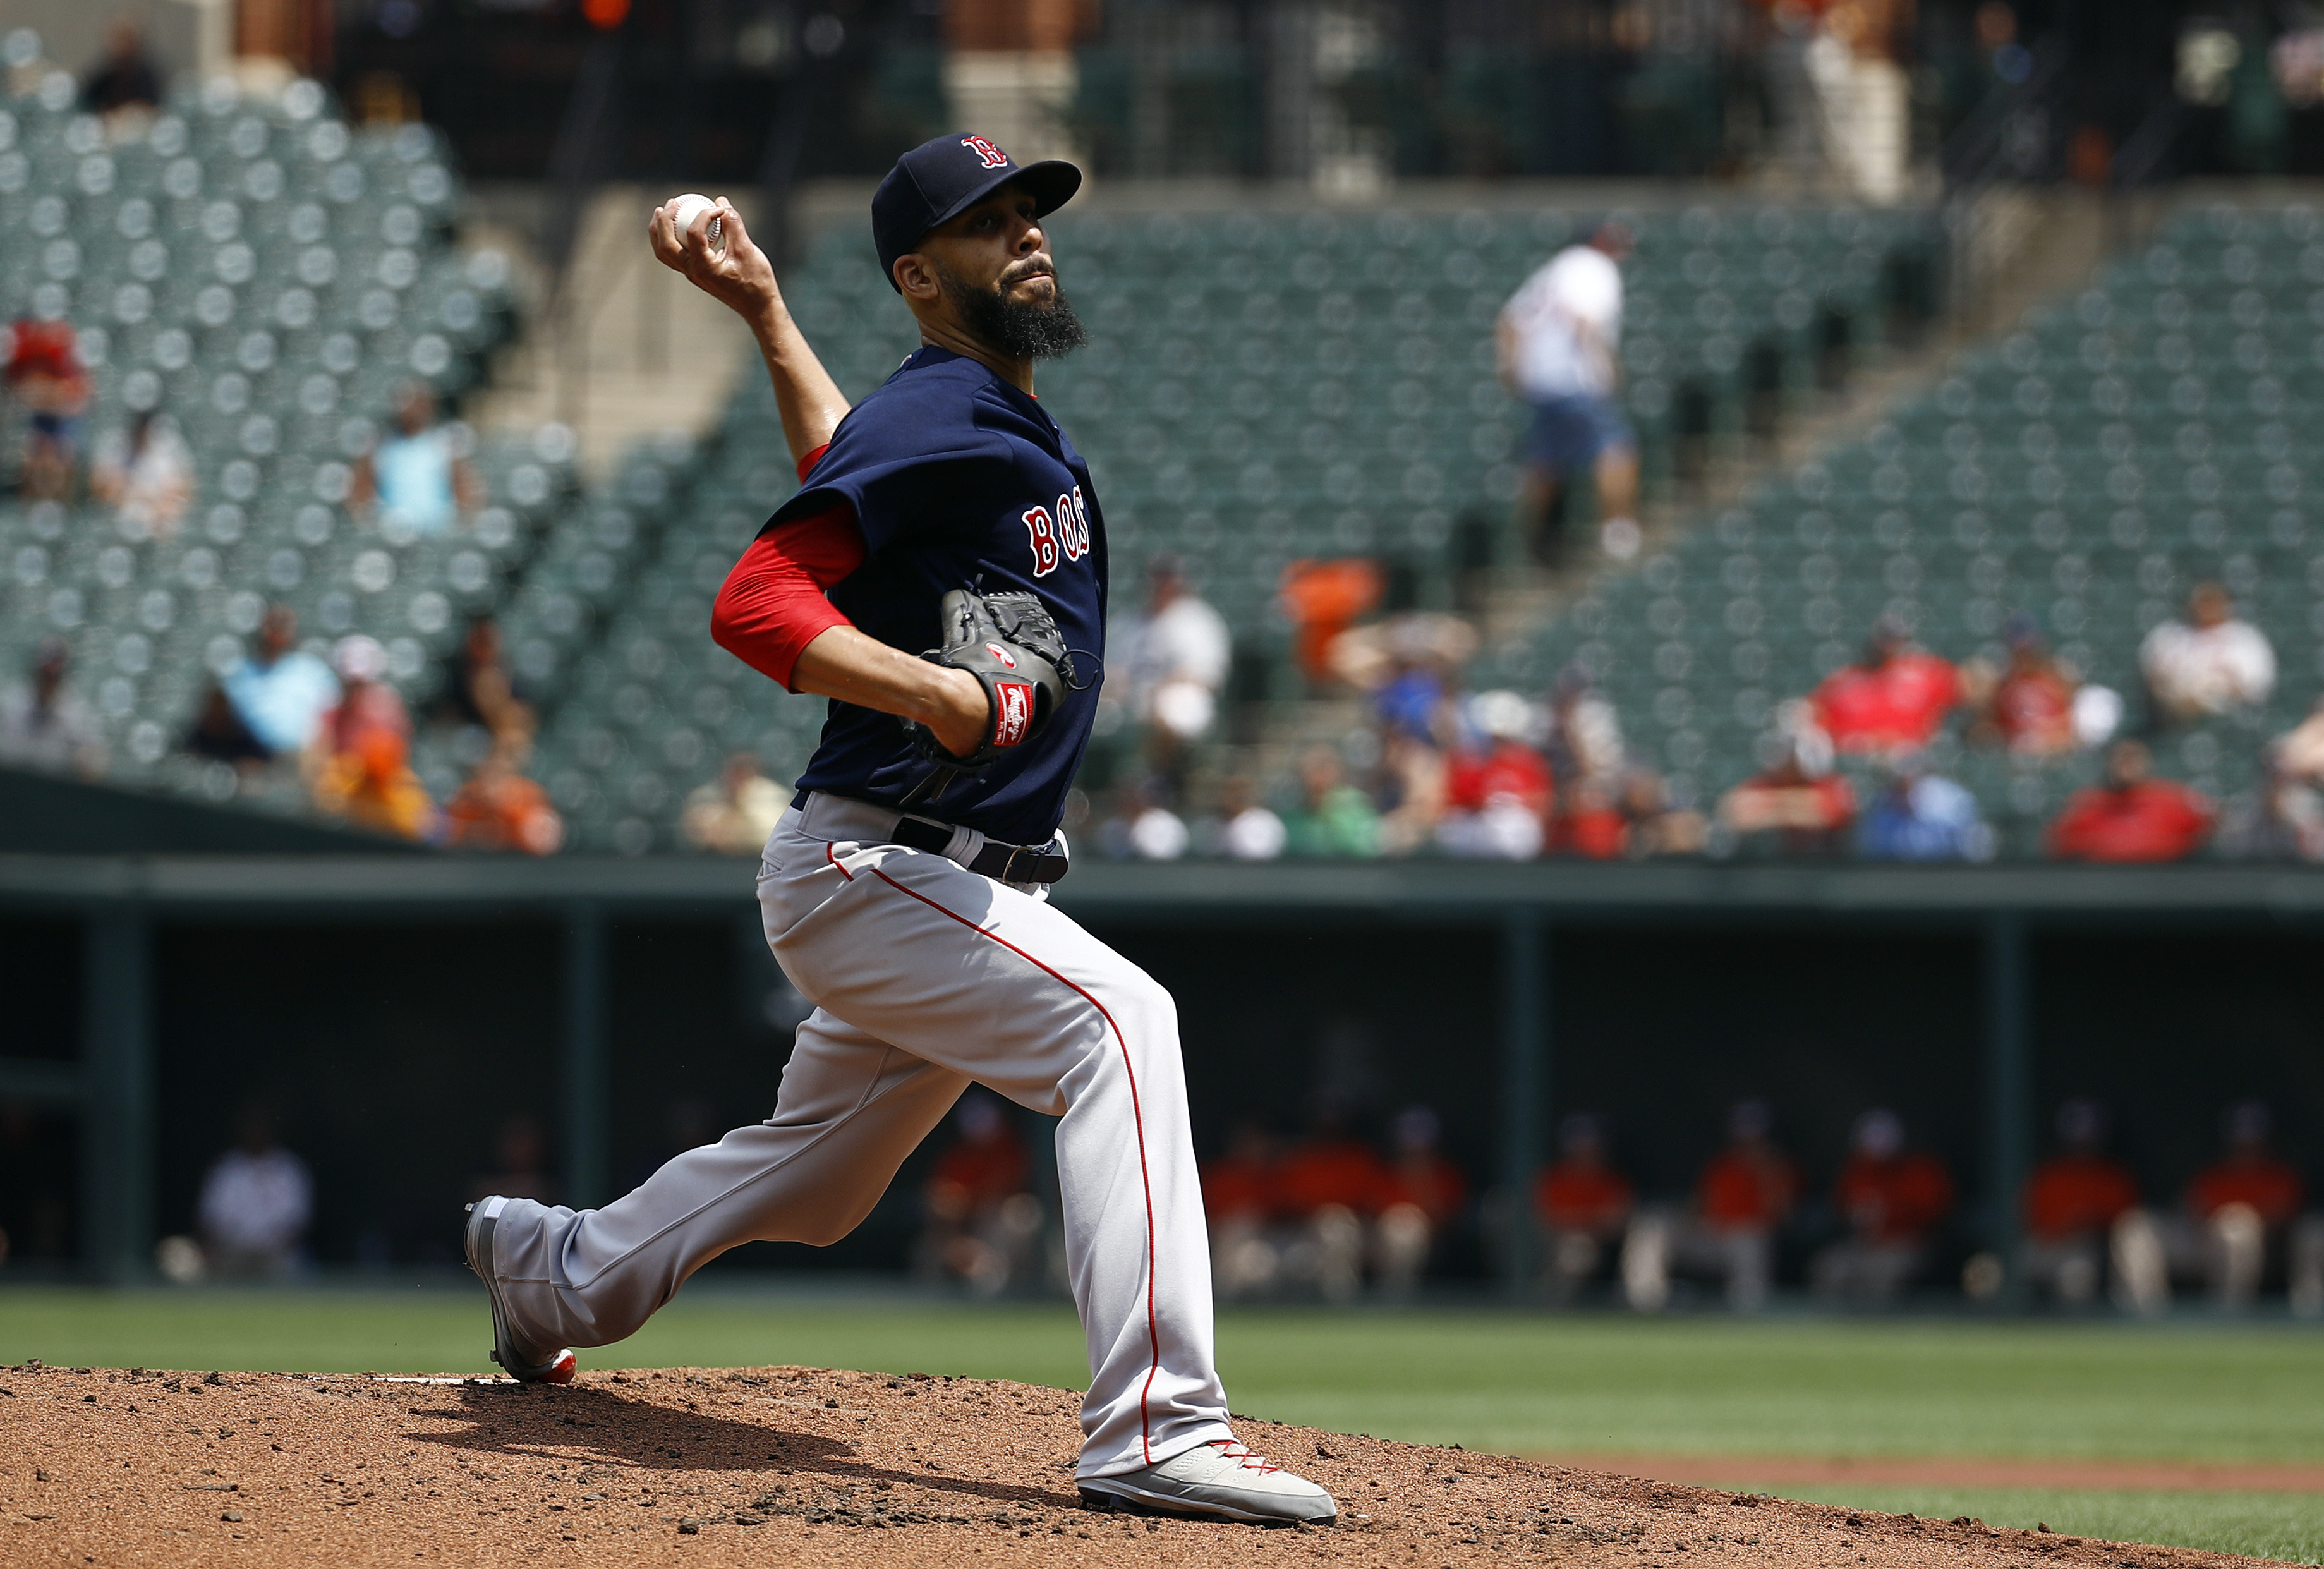 Price fans 10 to help Red Sox beat Orioles 5-0 in Game 1